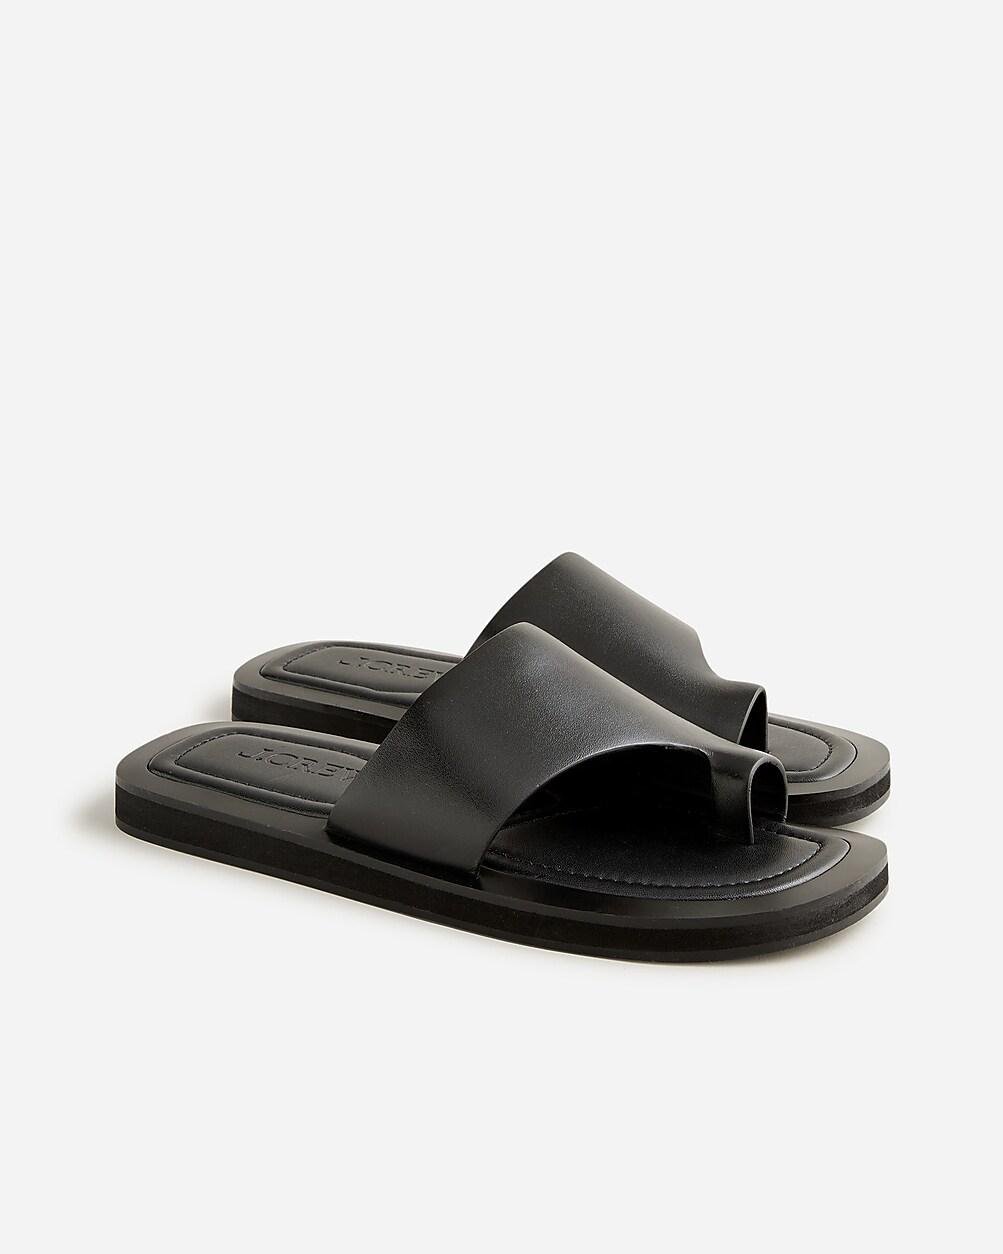 Toe-ring slide sandals in leather by J.CREW